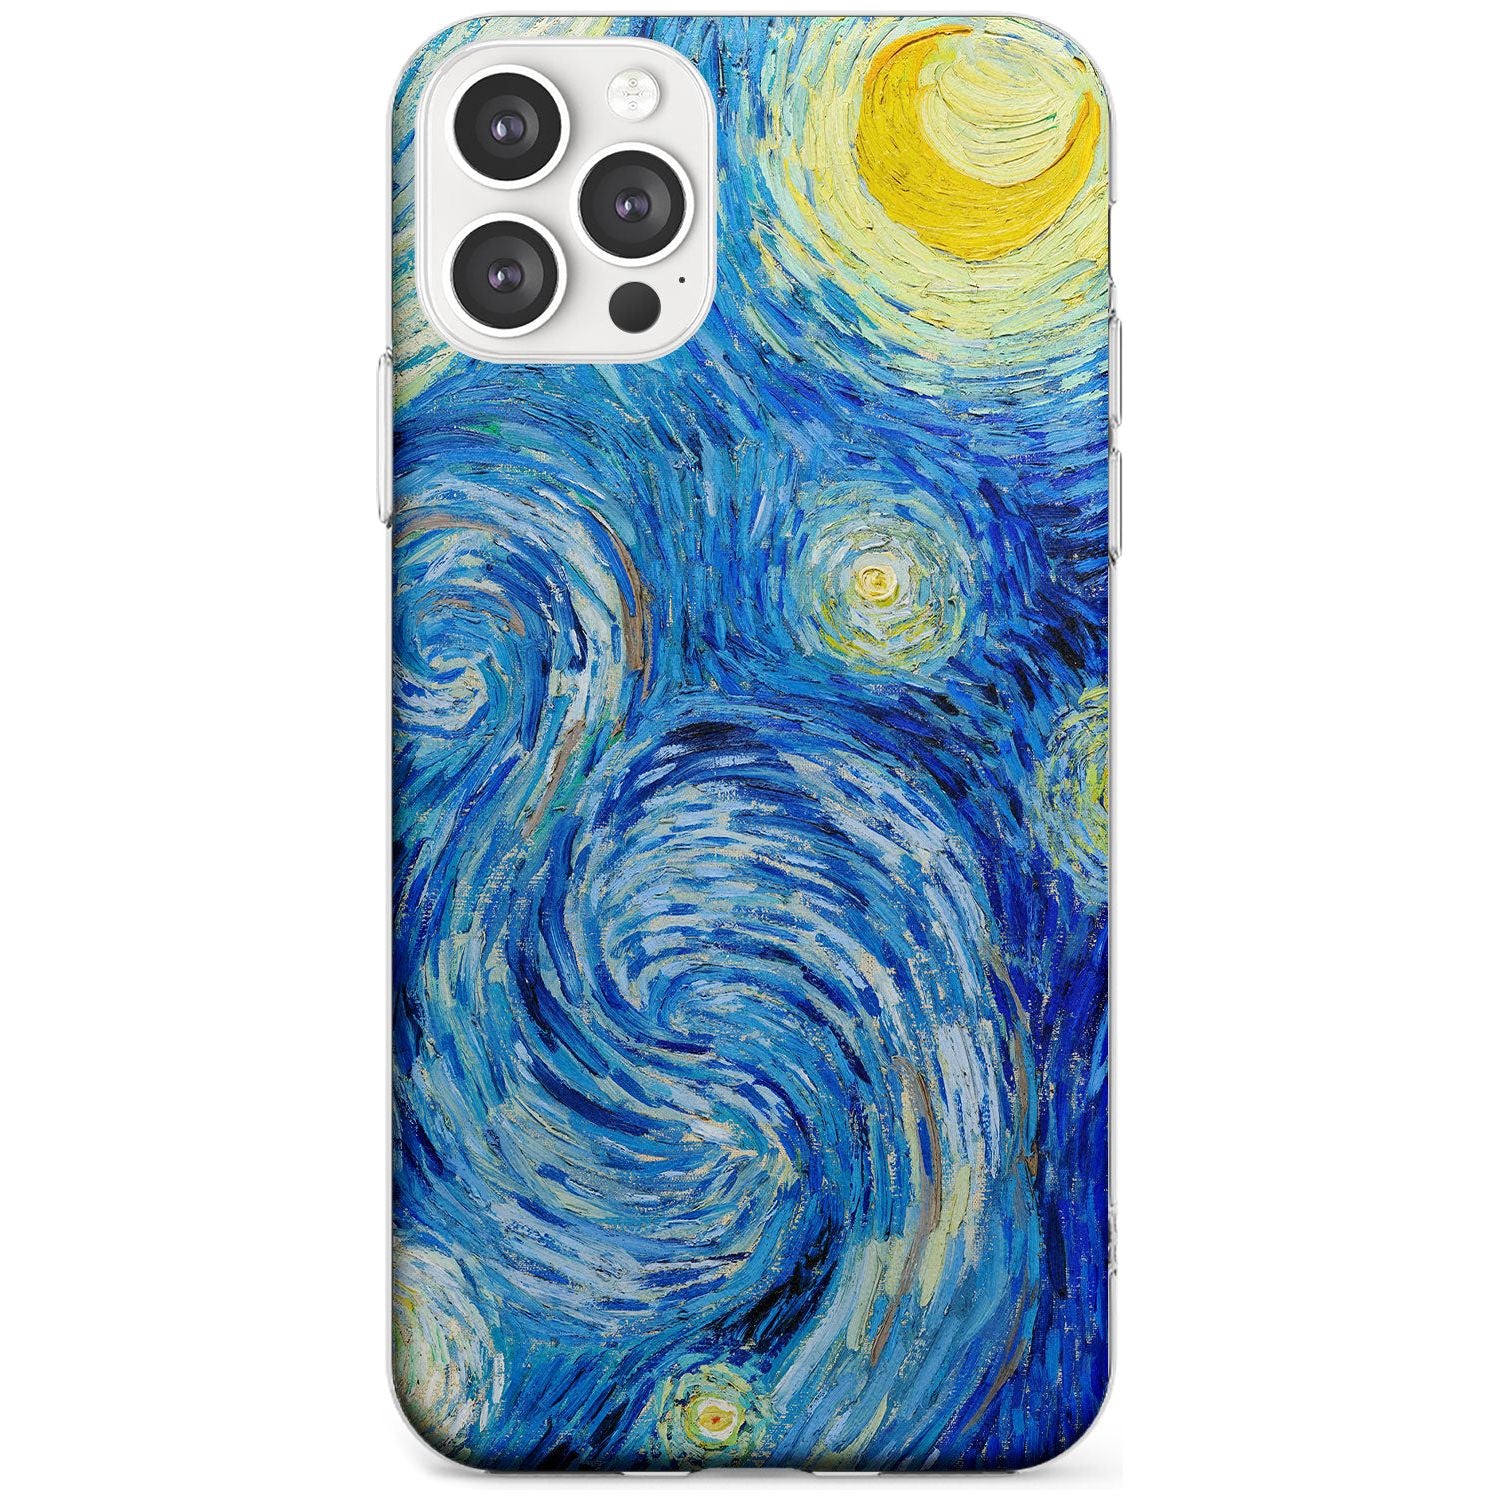 The Starry Night by Vincent Van Gogh Black Impact Phone Case for iPhone 11 Pro Max